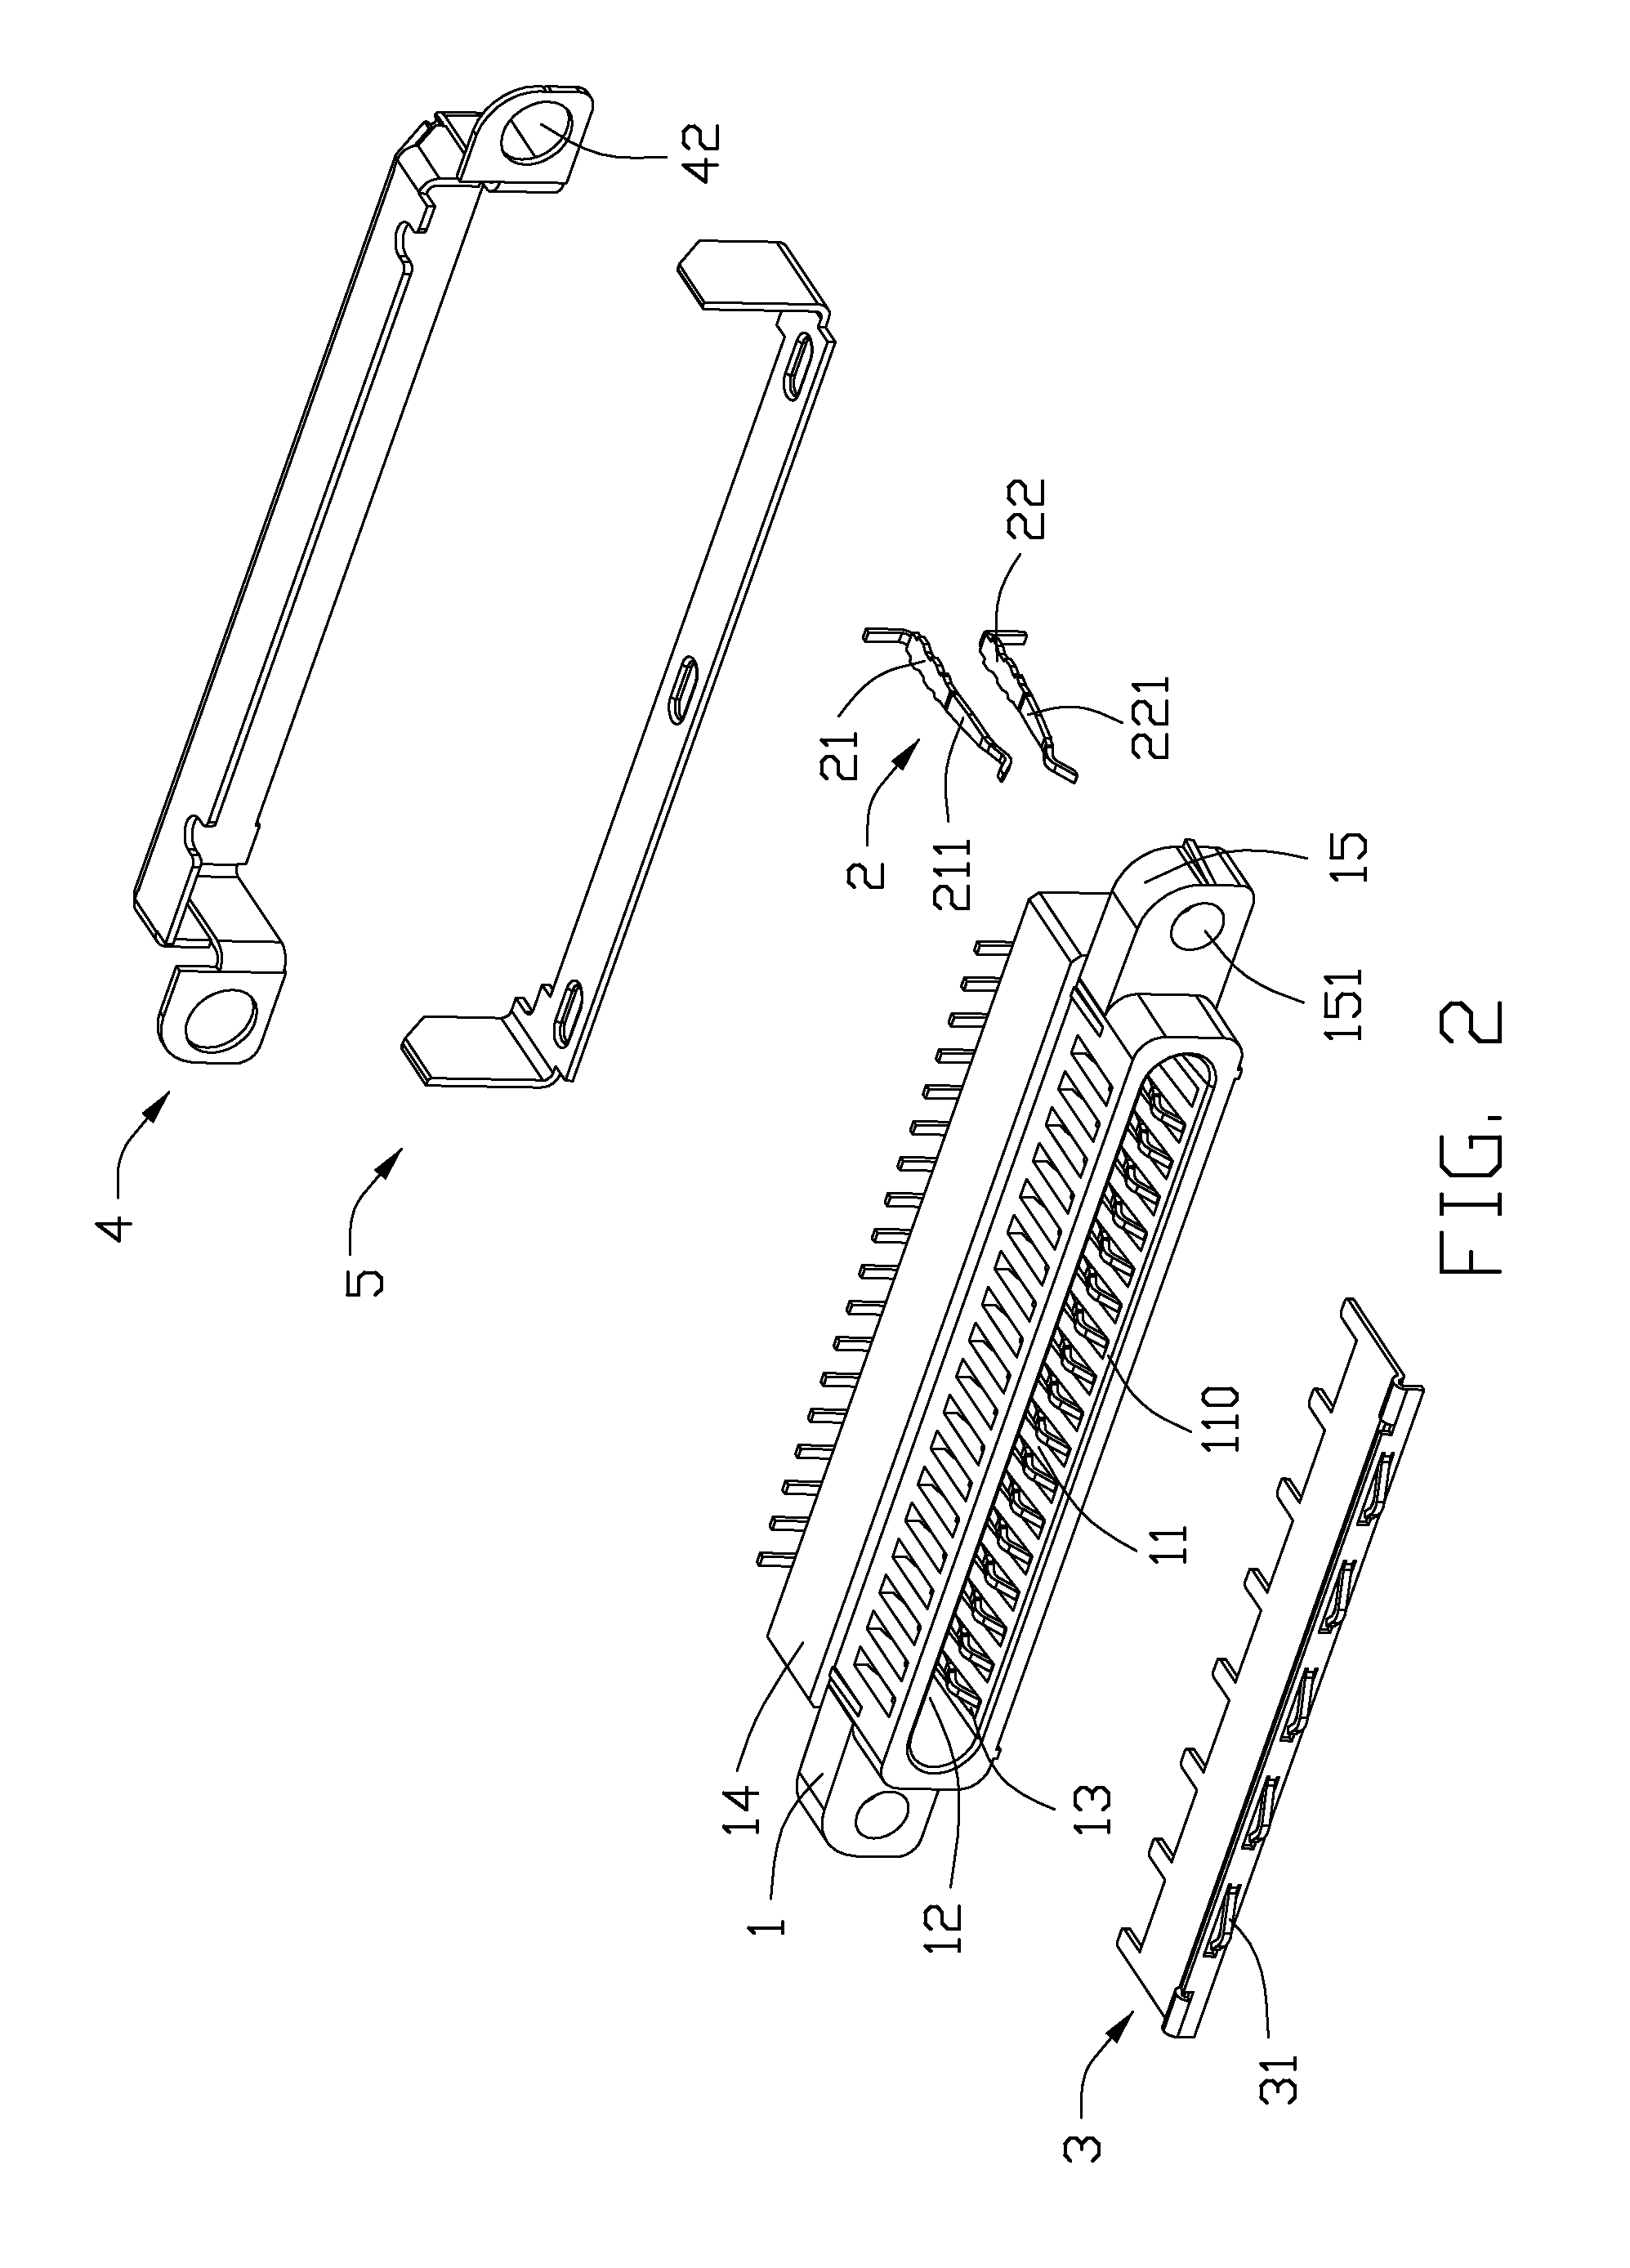 Electrical connector with grounding plate